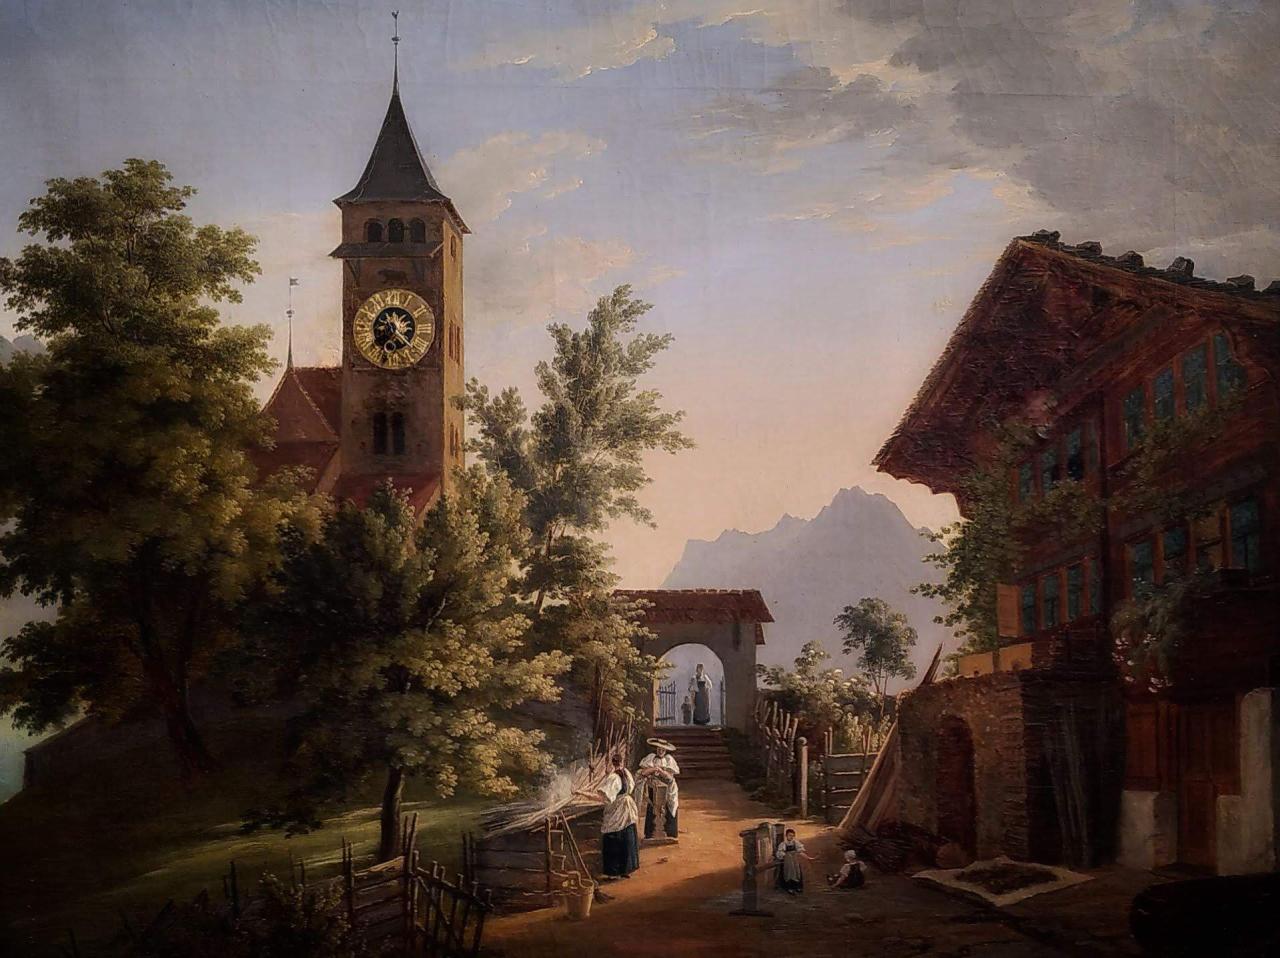 19th century town with churchspire, people at work, children at play